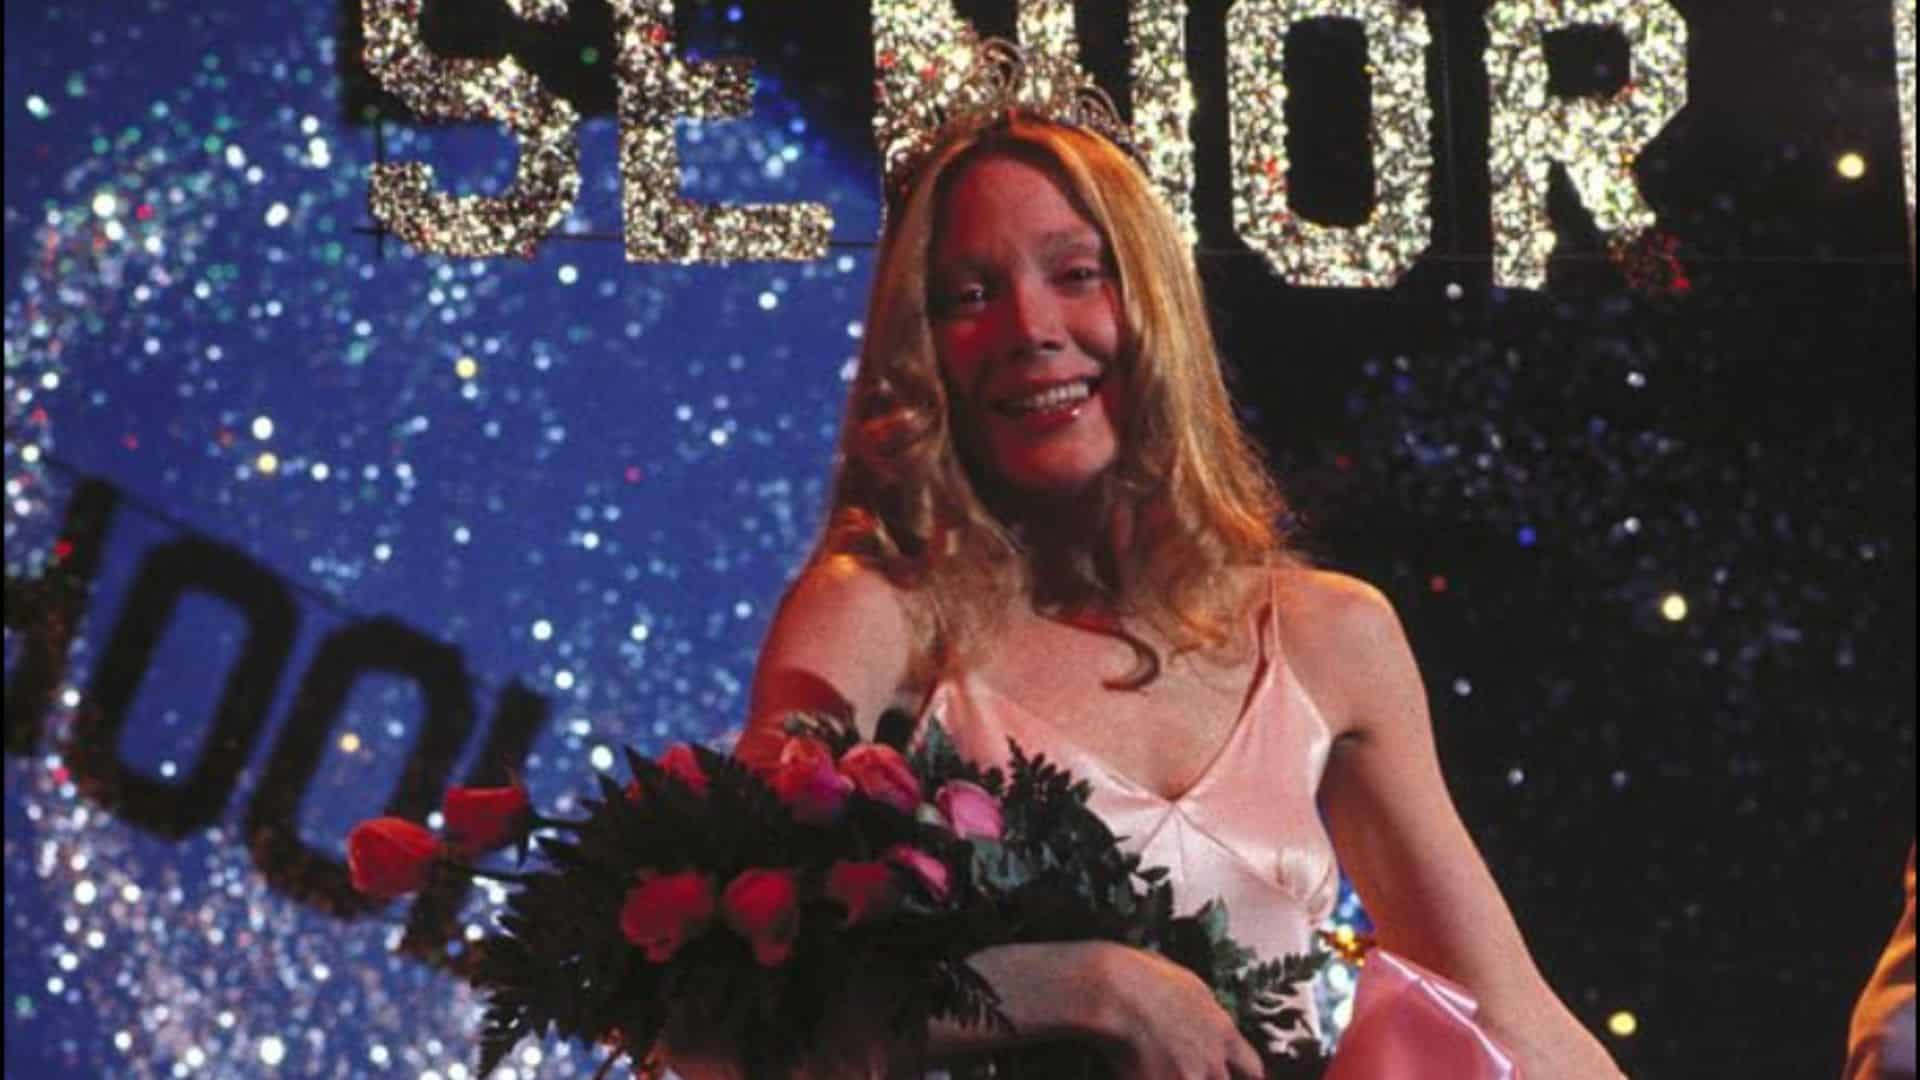 A young woman is crowned prom queen with a bouquet of roses in this image from Red Bank Films.